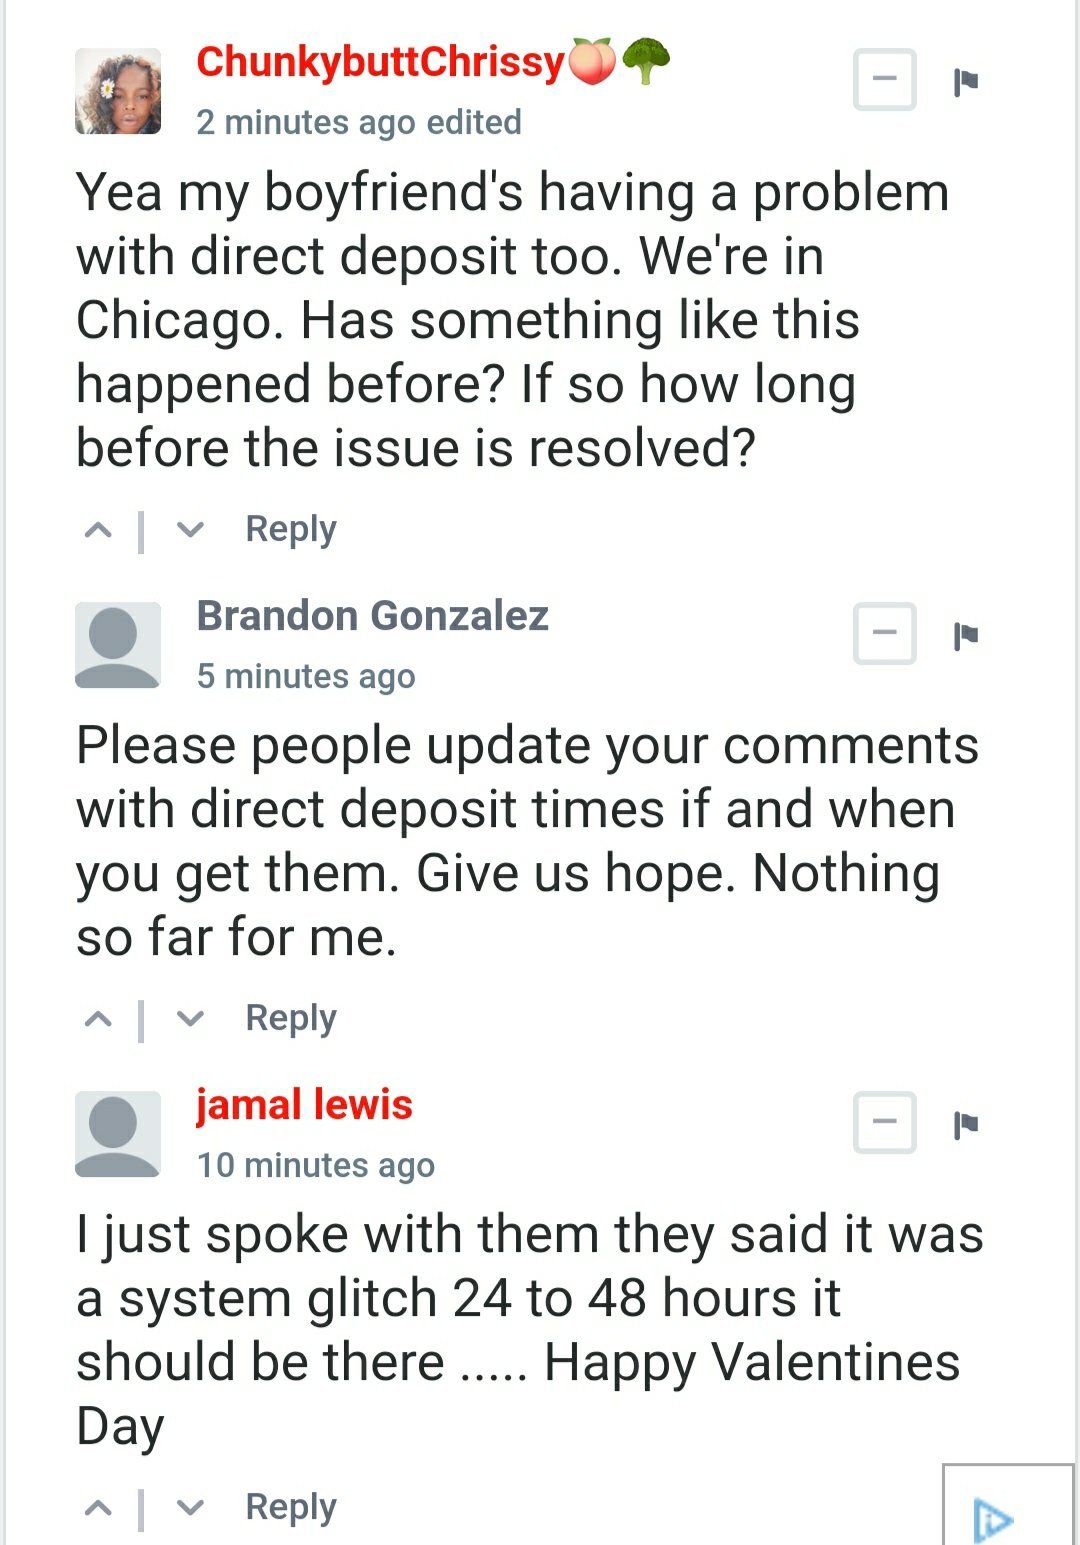 PayPal down - Users facing issues with Direct Deposit currently